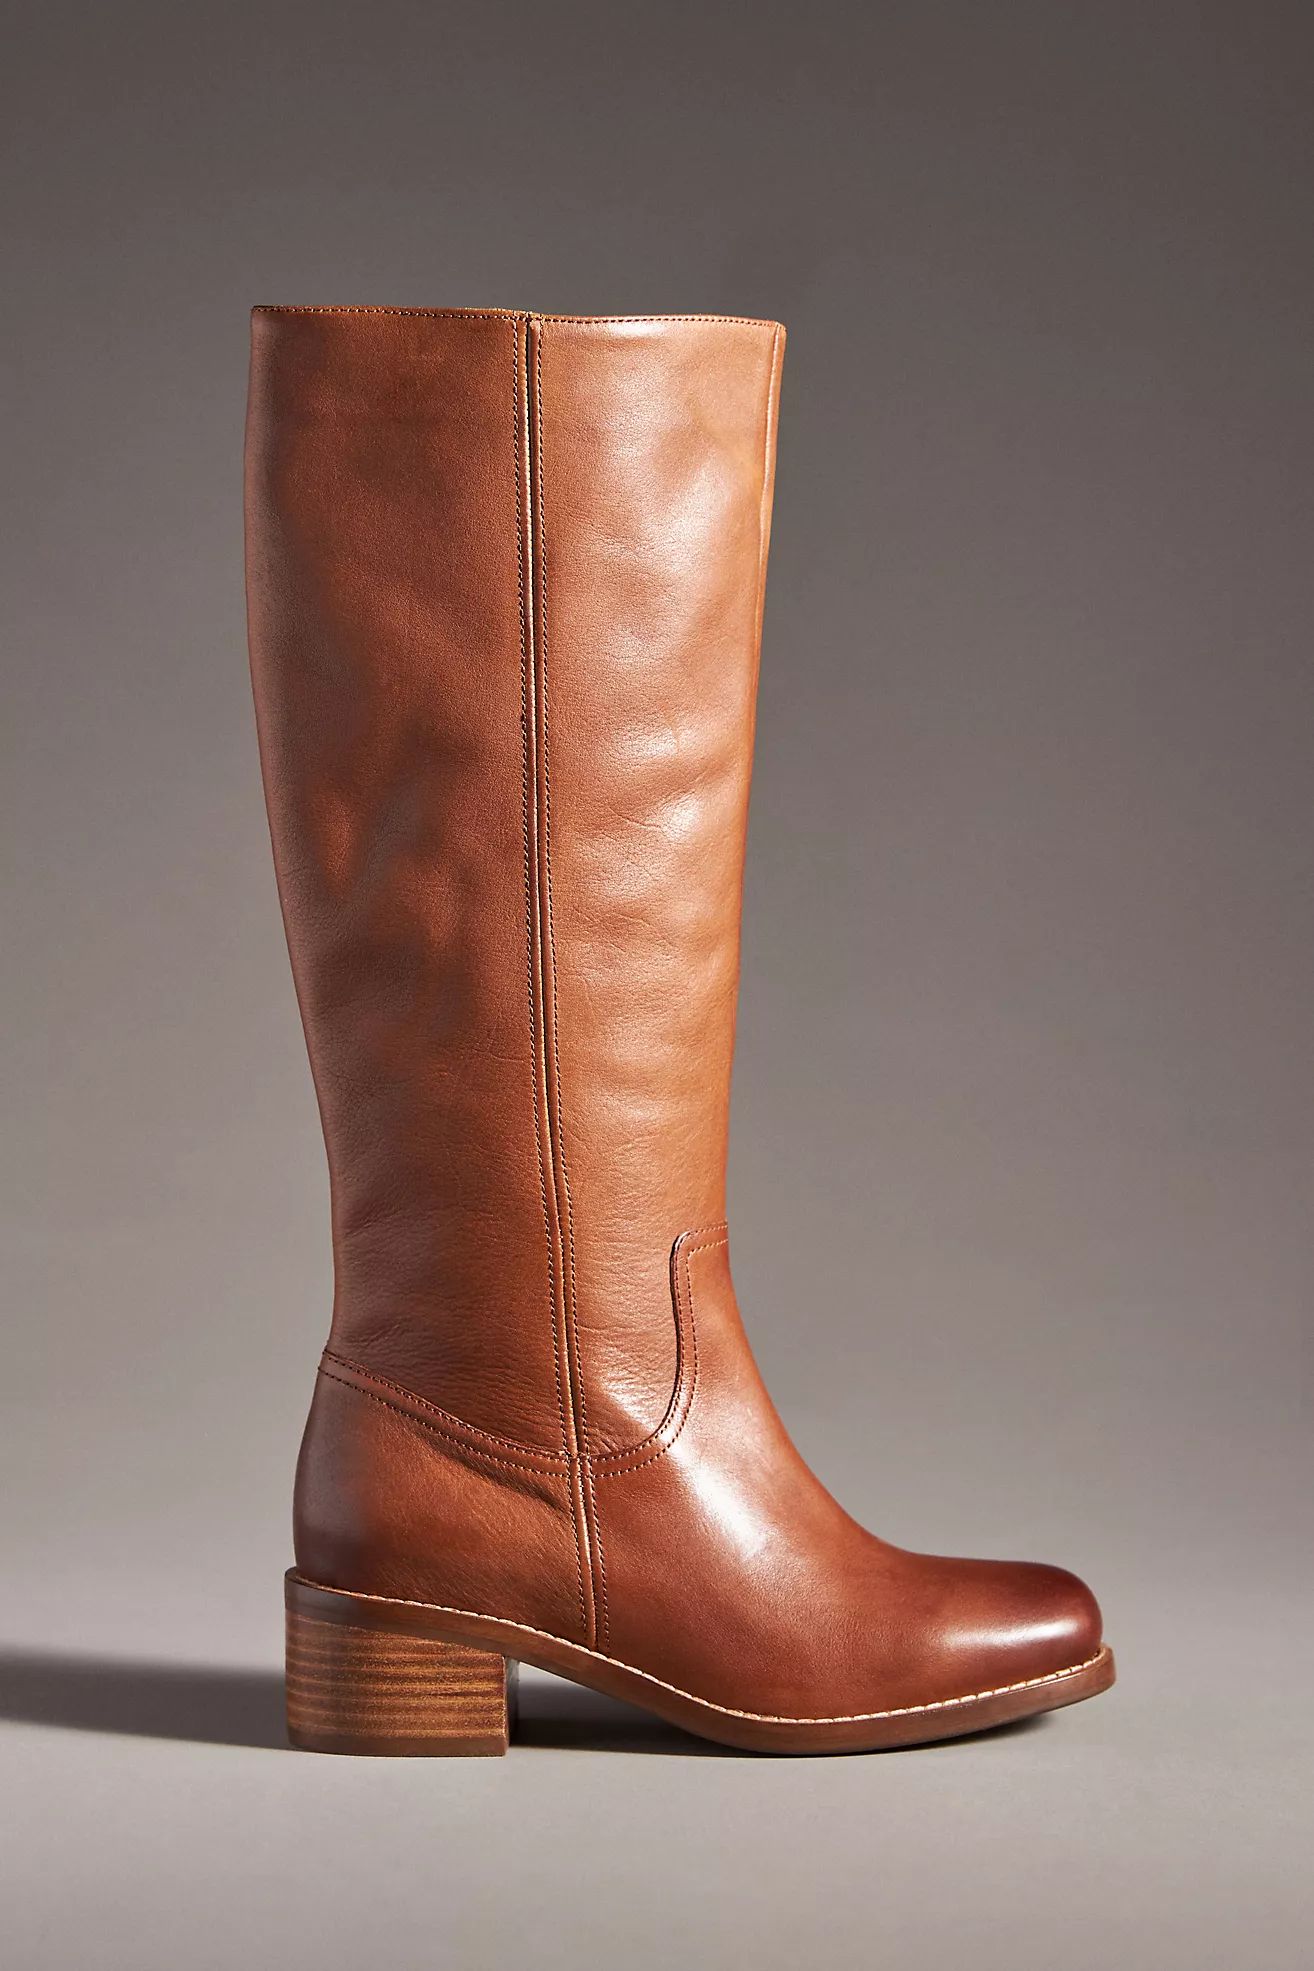 Seychelles Sand in My Boots Boots | Anthropologie (US)